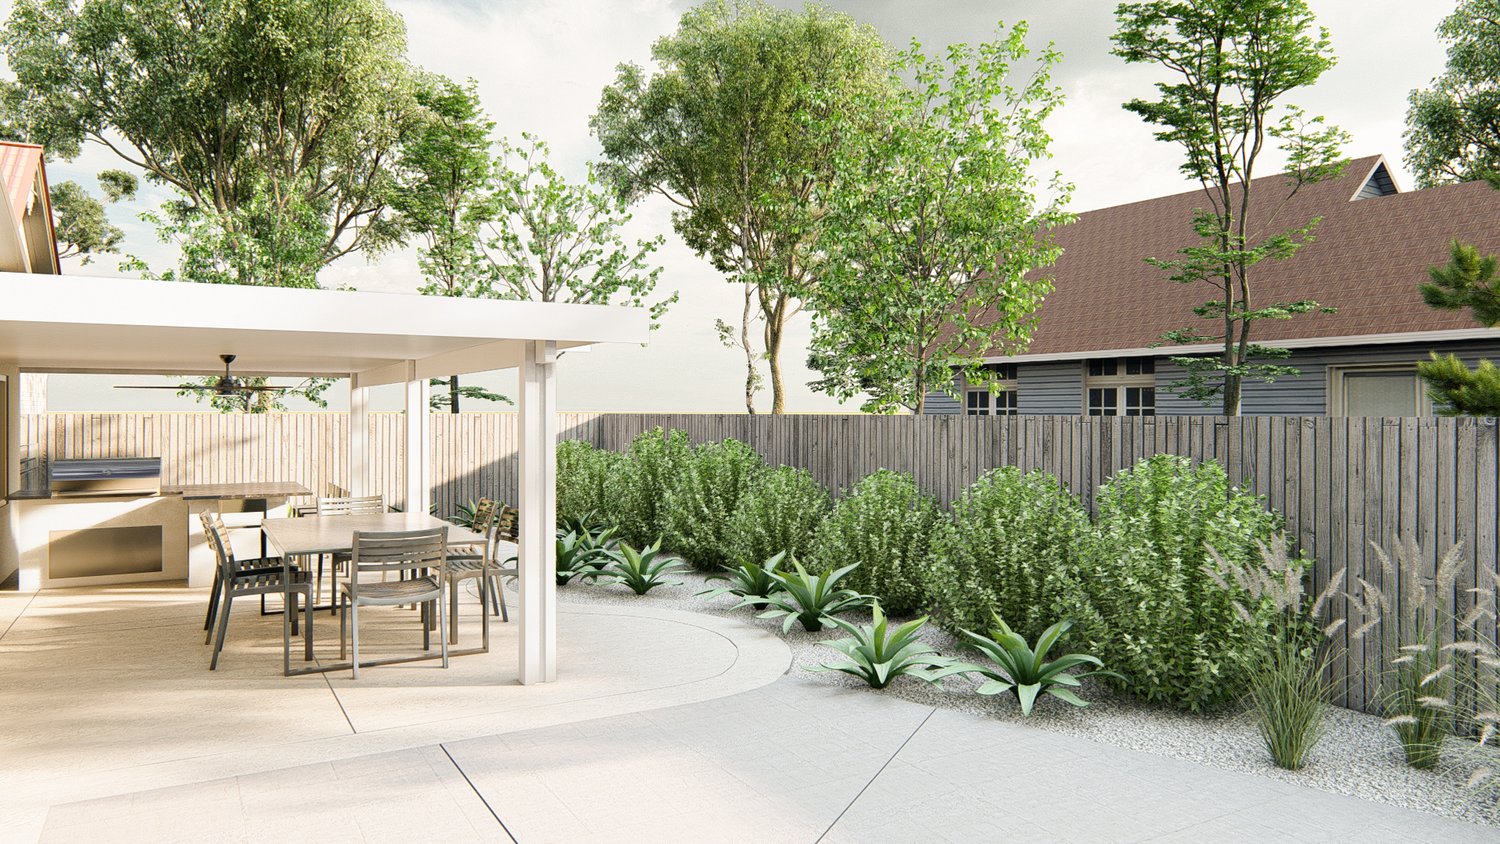 Sacramento side yard showing concrete patio with pergola over outdoor kitchen and dining area, with plant section